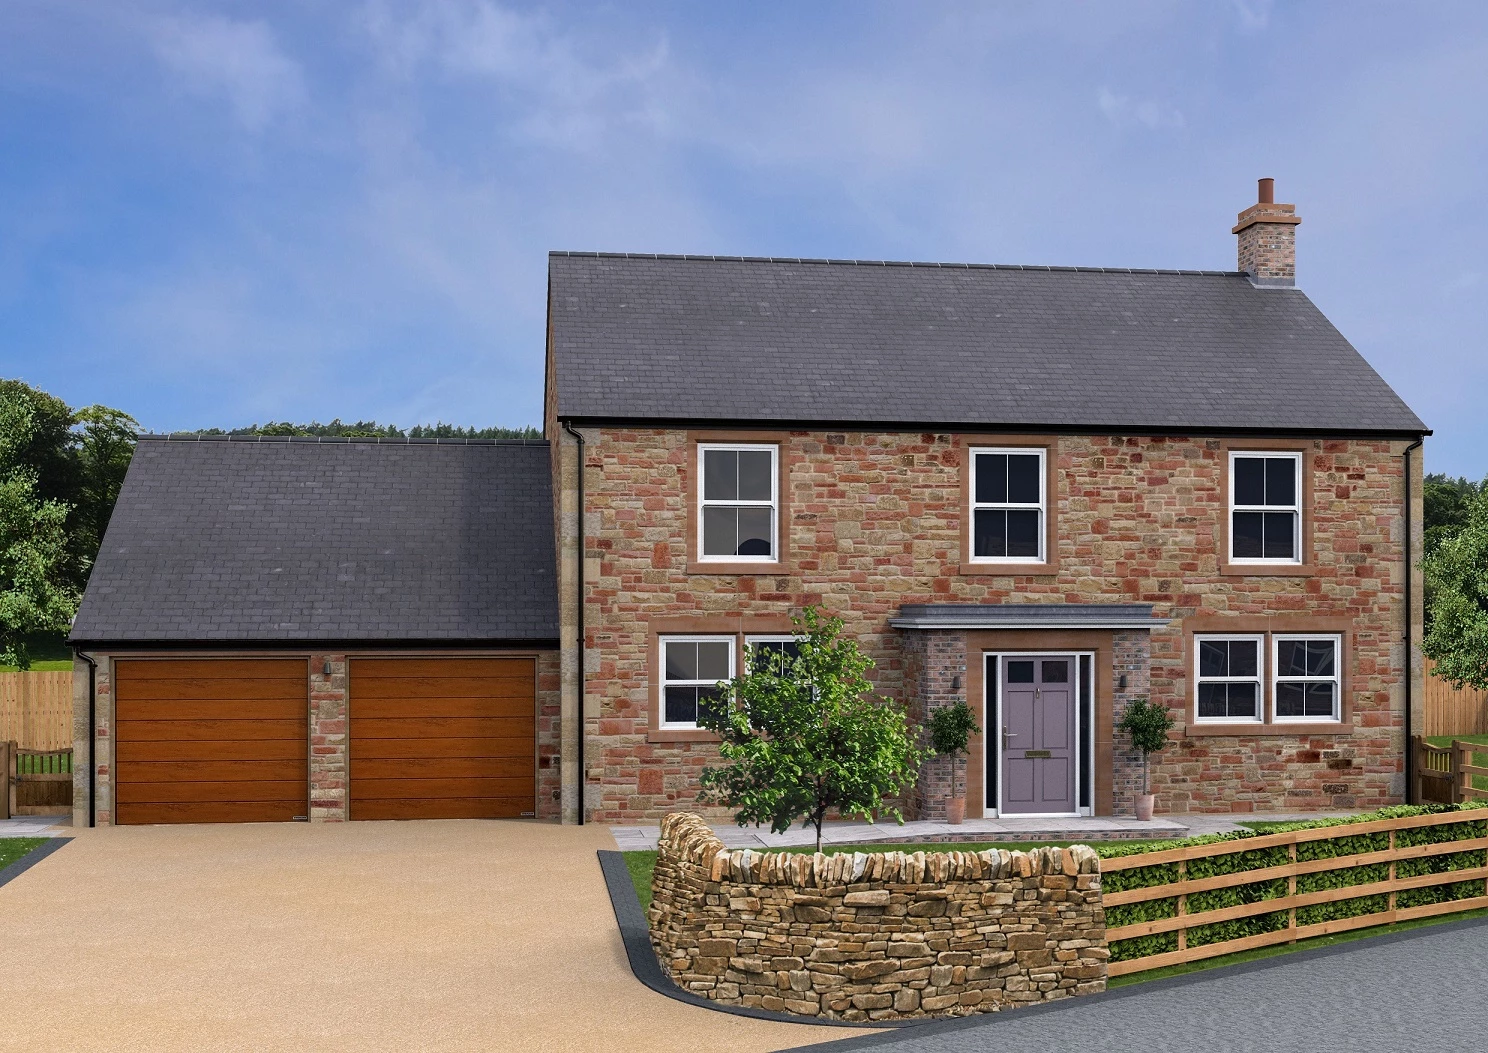 An illustration of one of the nine four-bedroom detached homes currently under construction at Hayton.